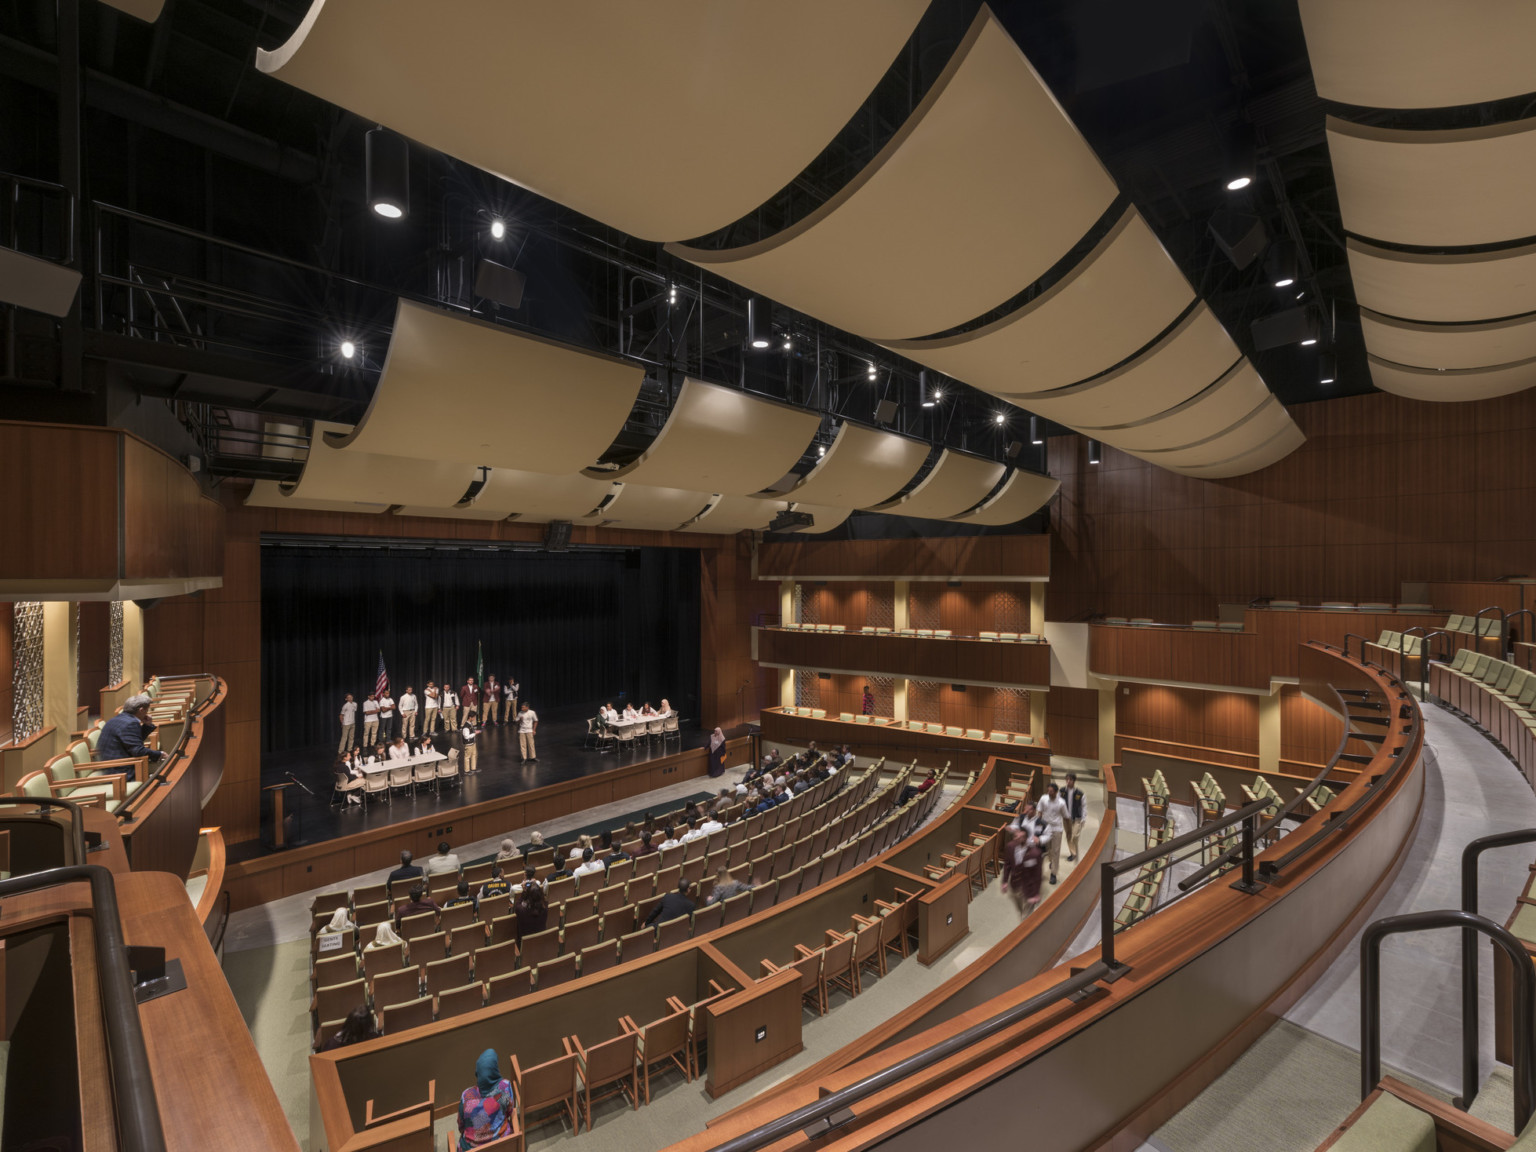 school theater with warm wood seating, box seating along the sides, beige acoustic ceiling panels, and black railings